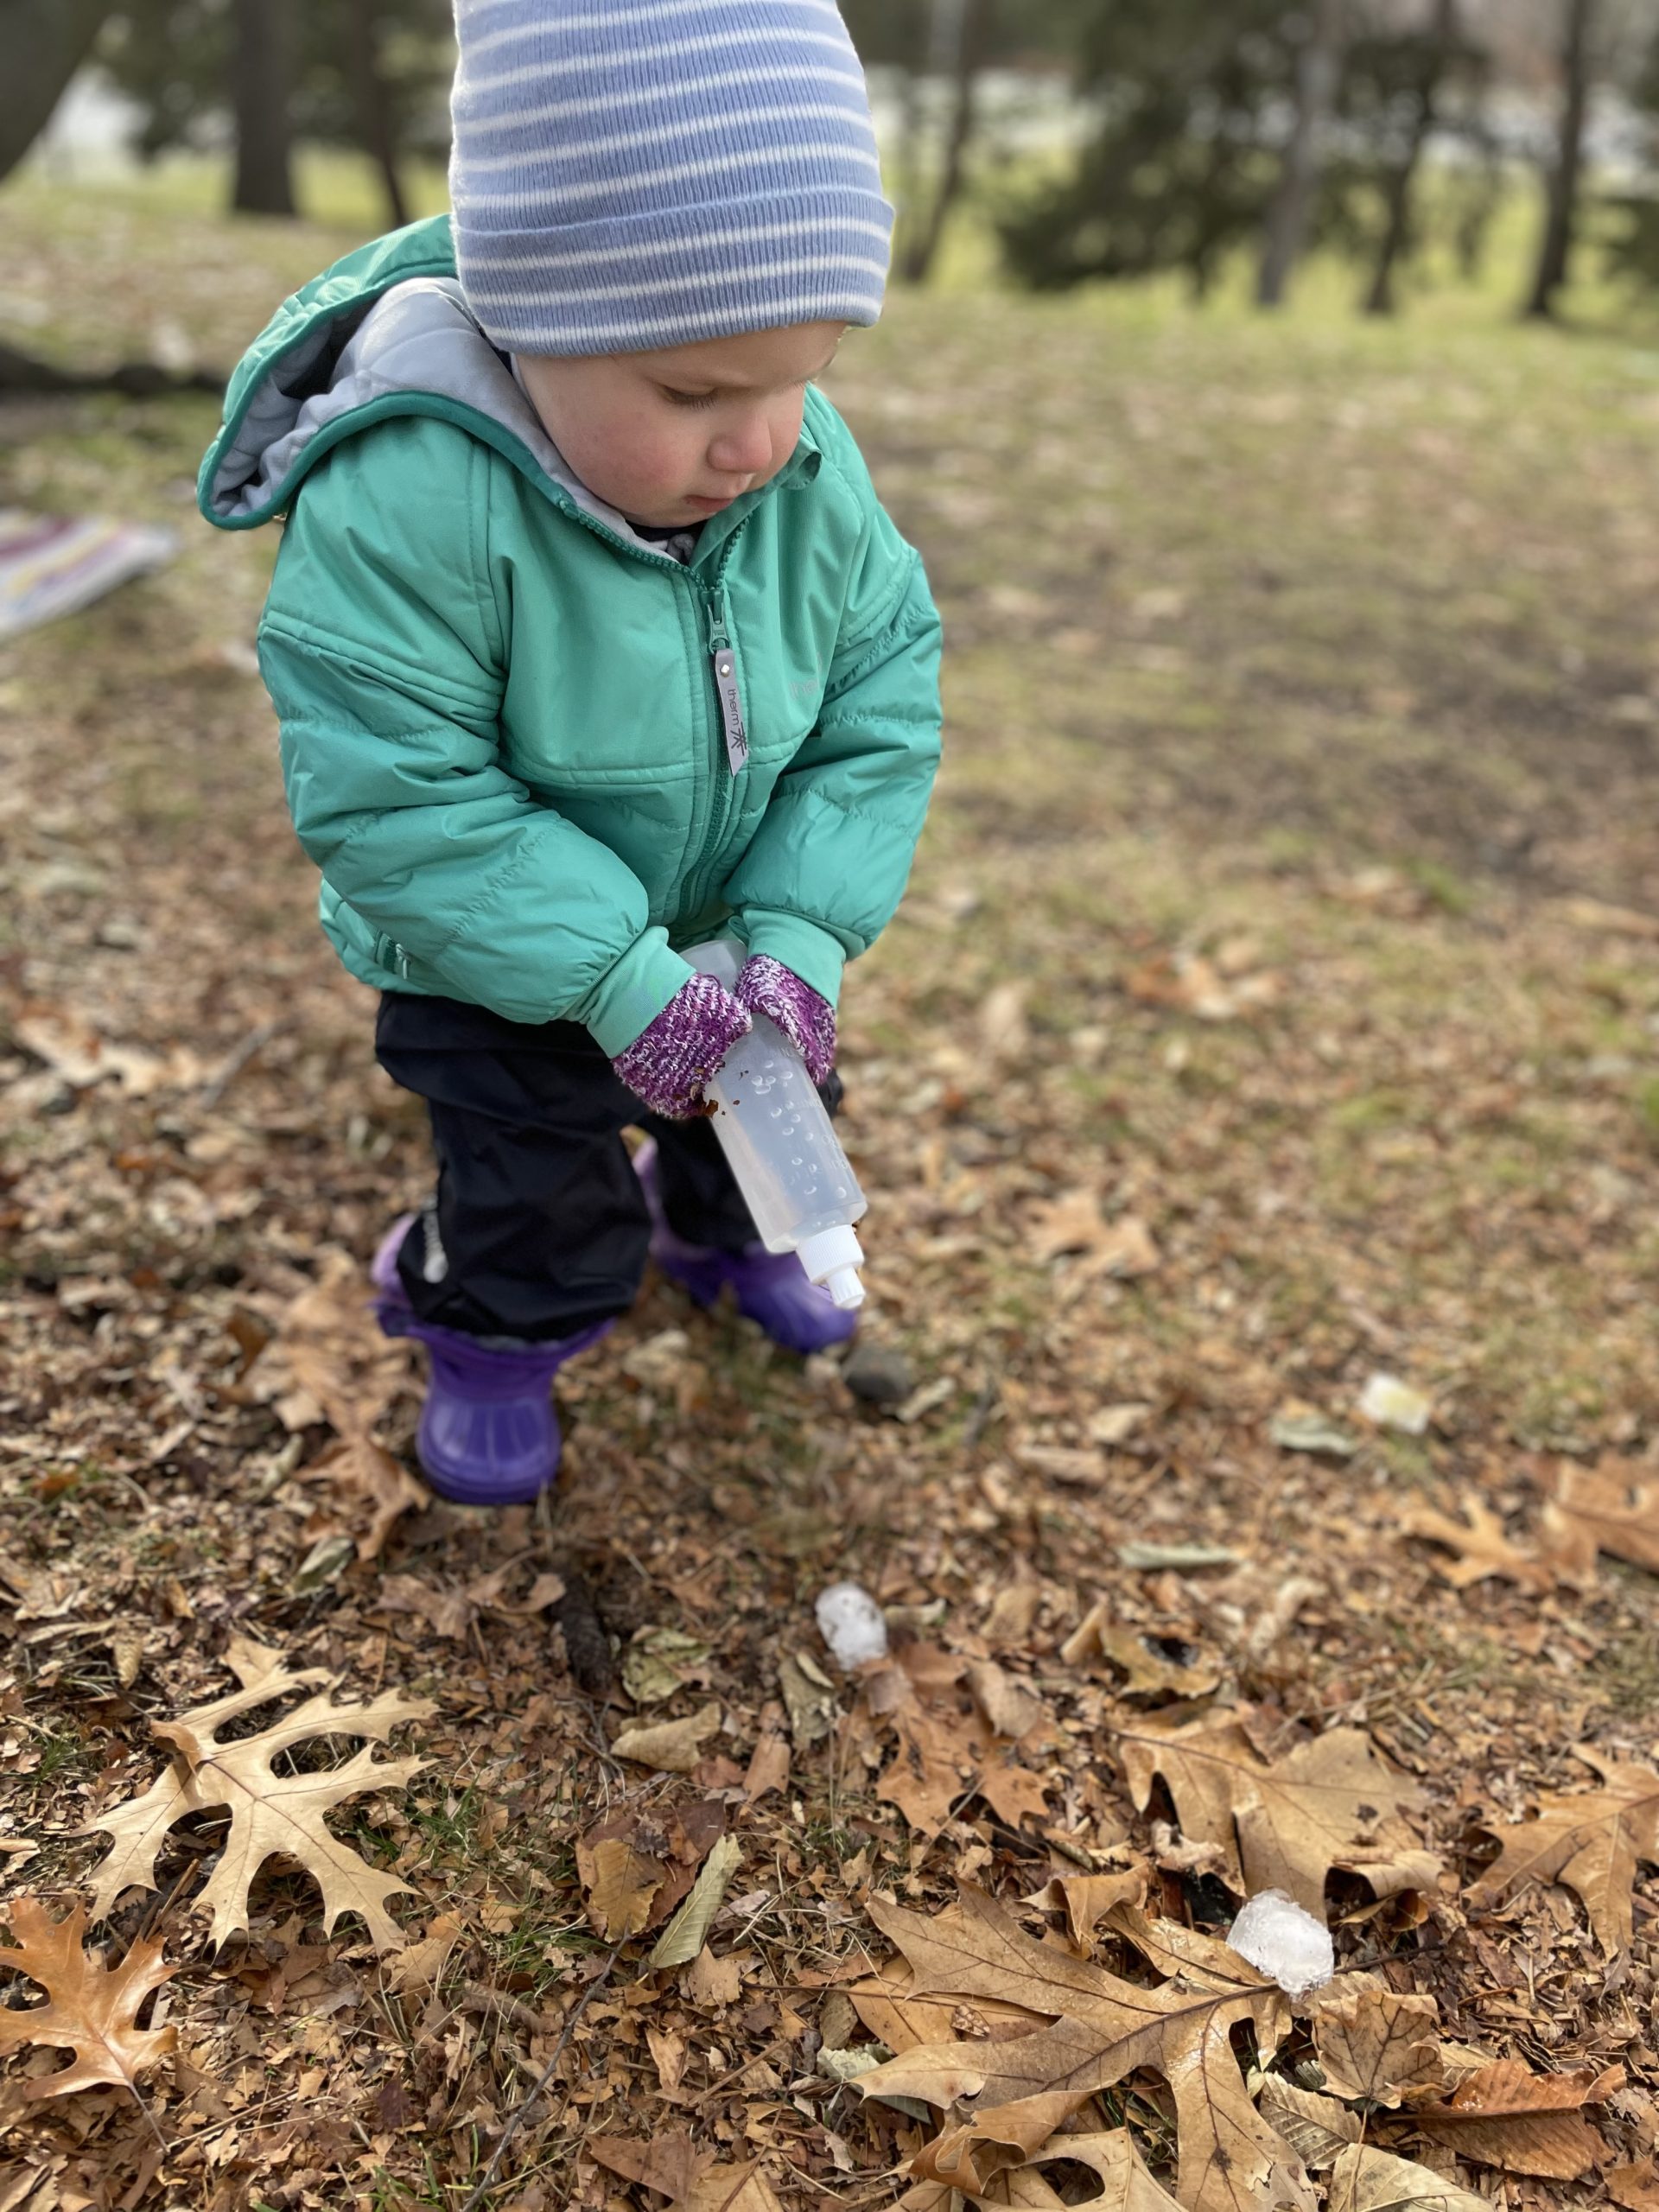 Toddler in hat and coat with a squeezy bottle of water. Cubes of ice are on the ground among the leaves.